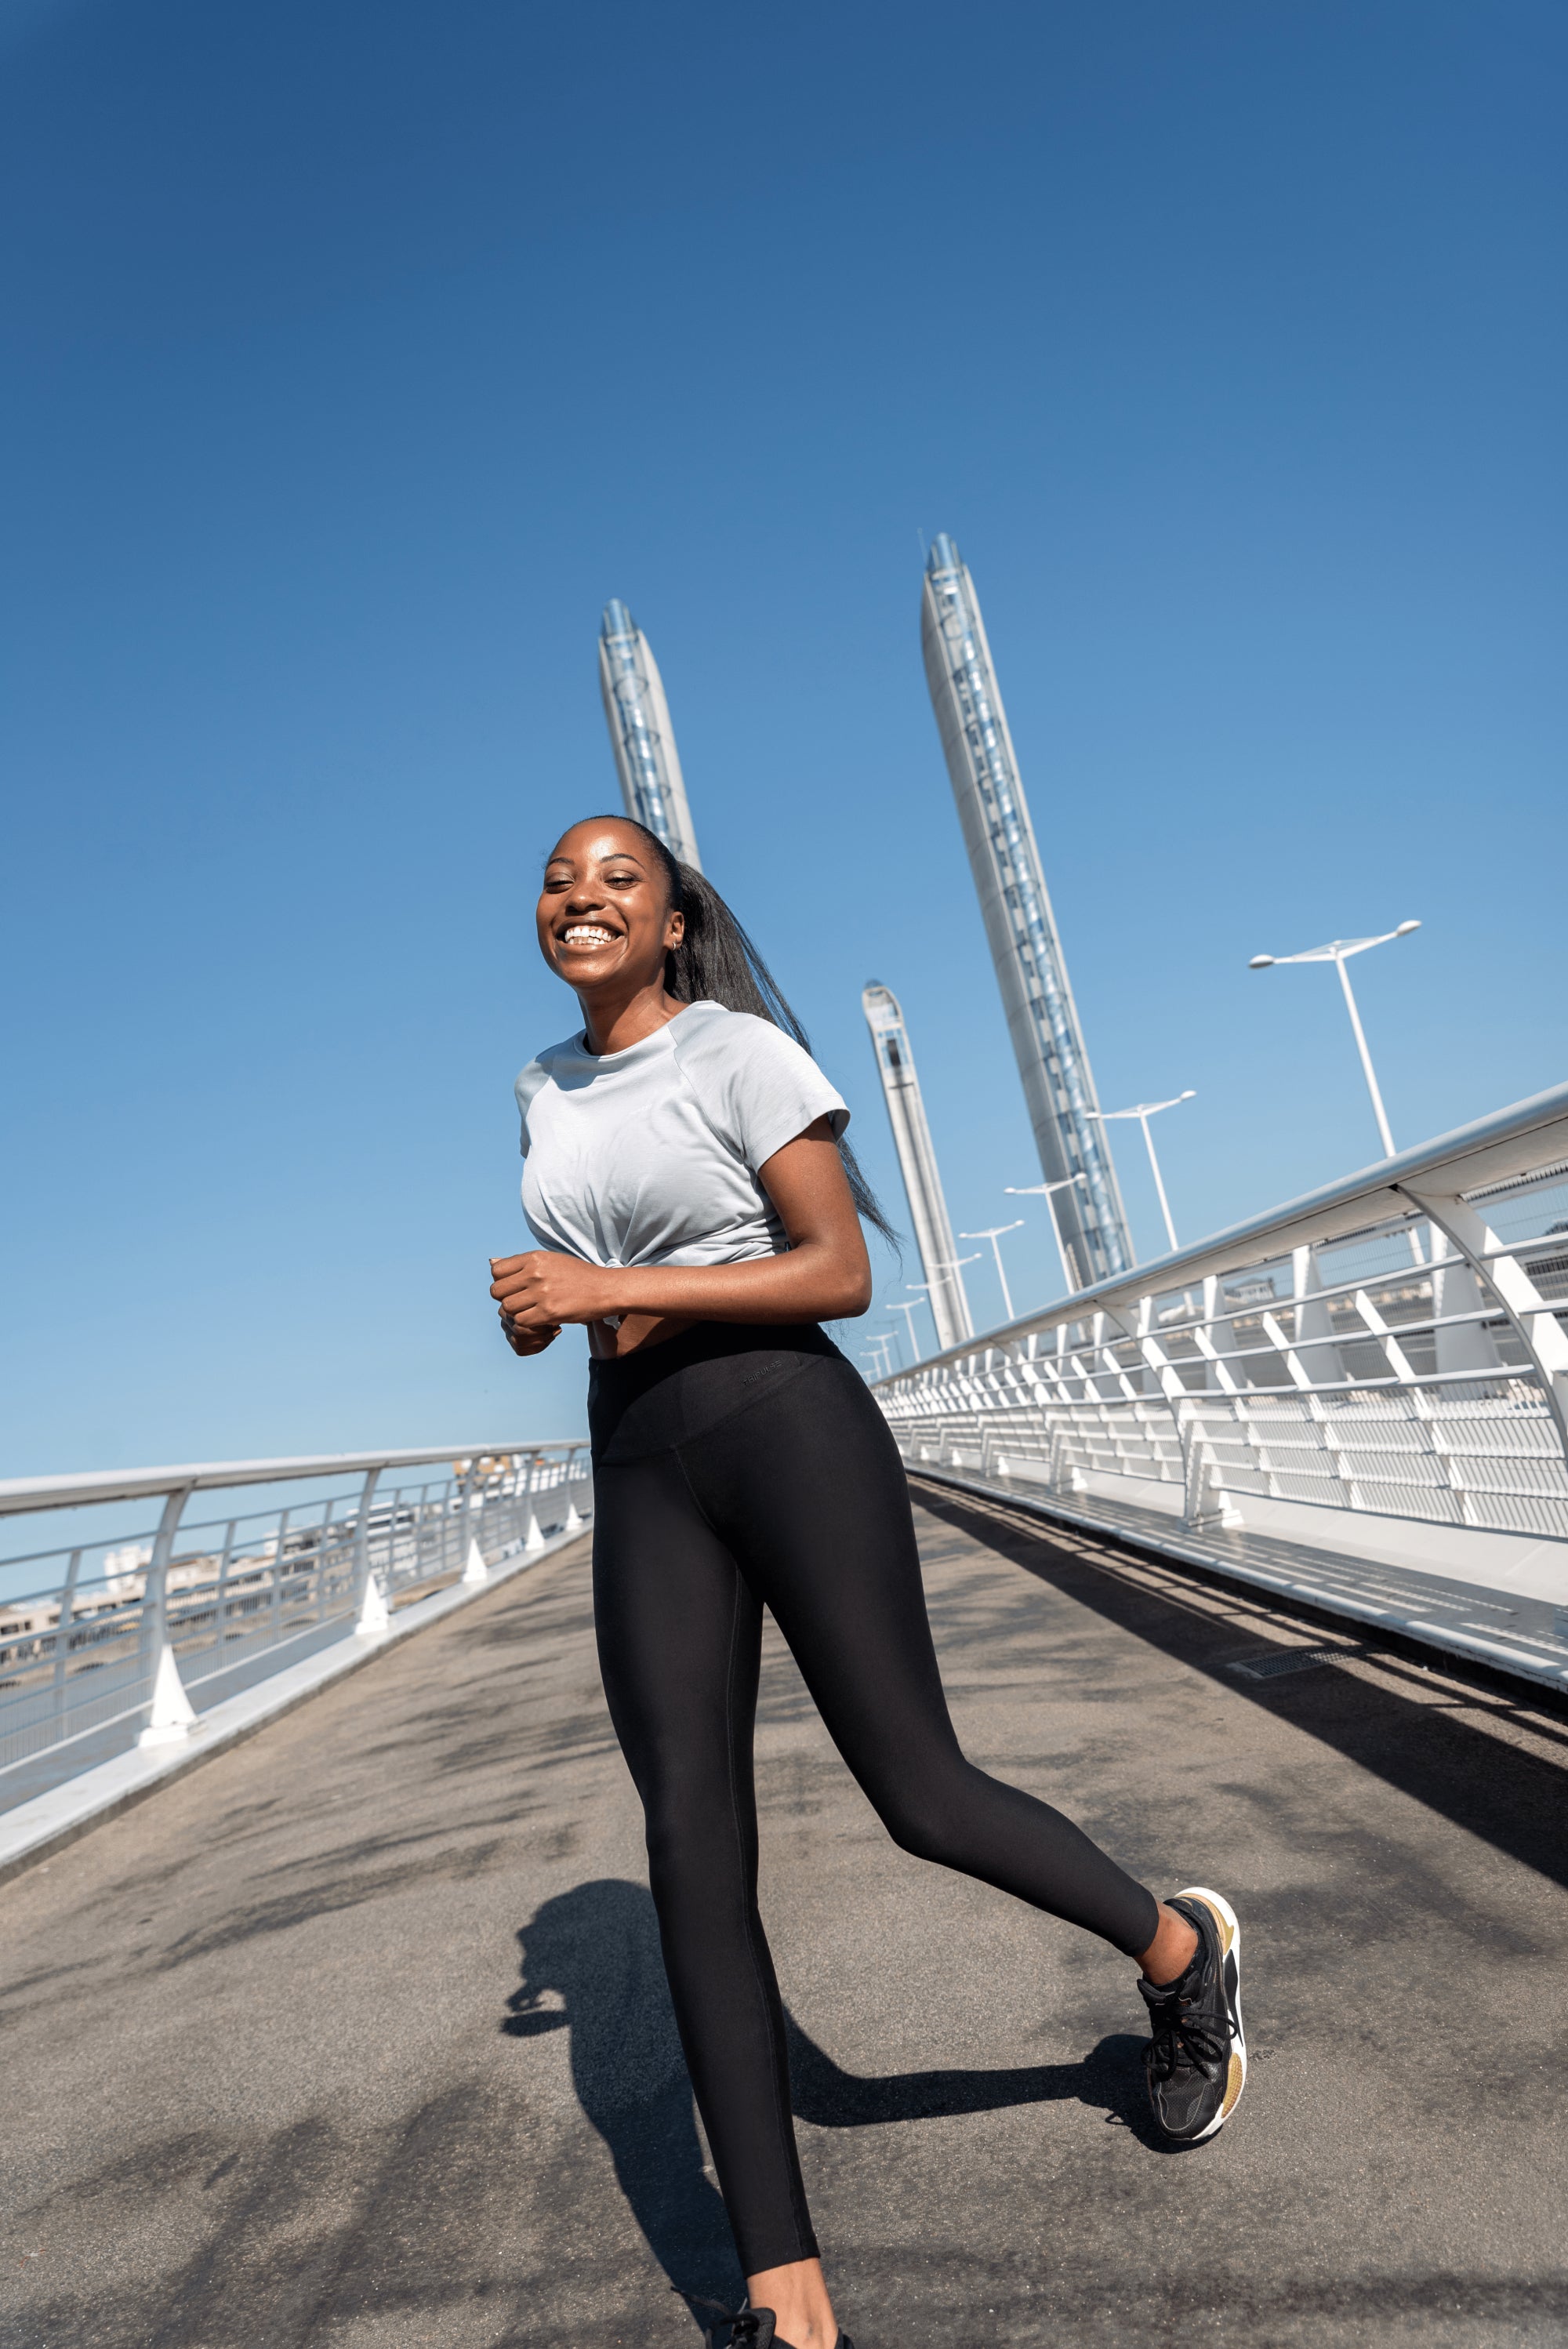 Woman with dark hair and complexion running outside on a pedestrian bridge in the sunshine. Woman is wearing Tripulse Original Workout T-Shirt in colour a timeless light grey colour. She is also wearing Tripulse Original Leggings 2.0 in classic black.